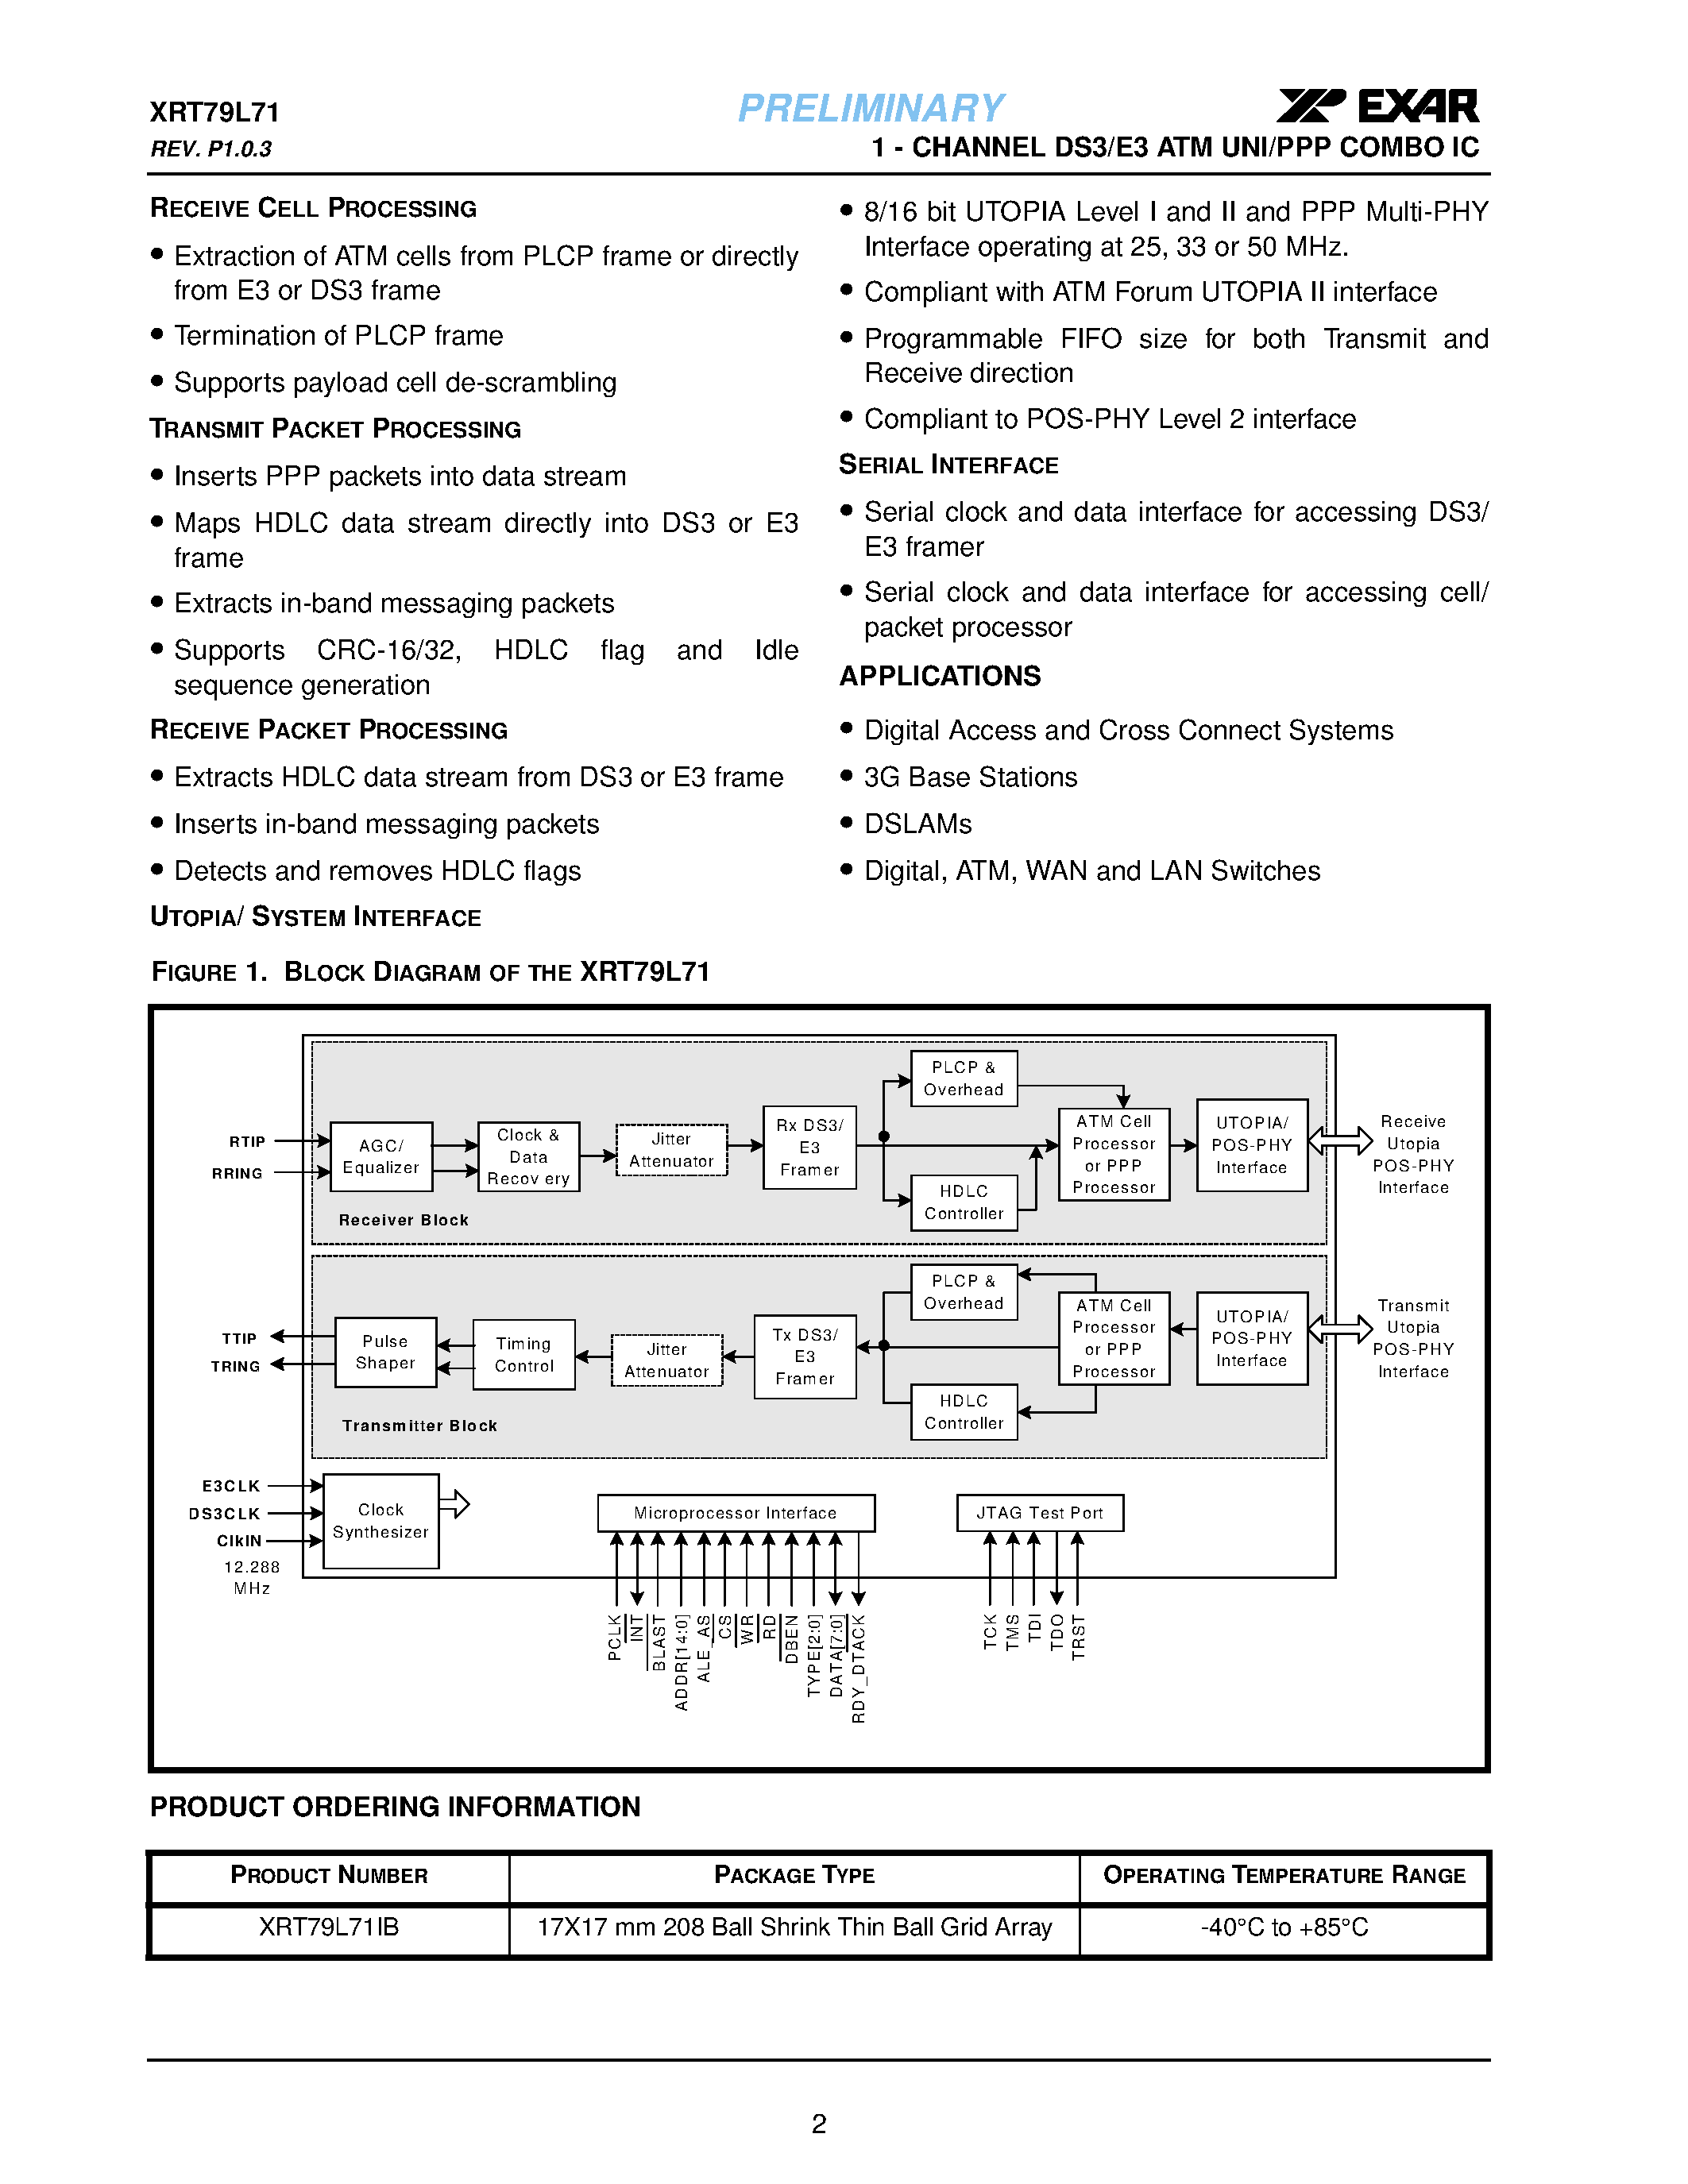 Datasheet XRT79L71 - 1-CHANNEL DS3/E3 ATM UNI/PPP COMBO IC page 2